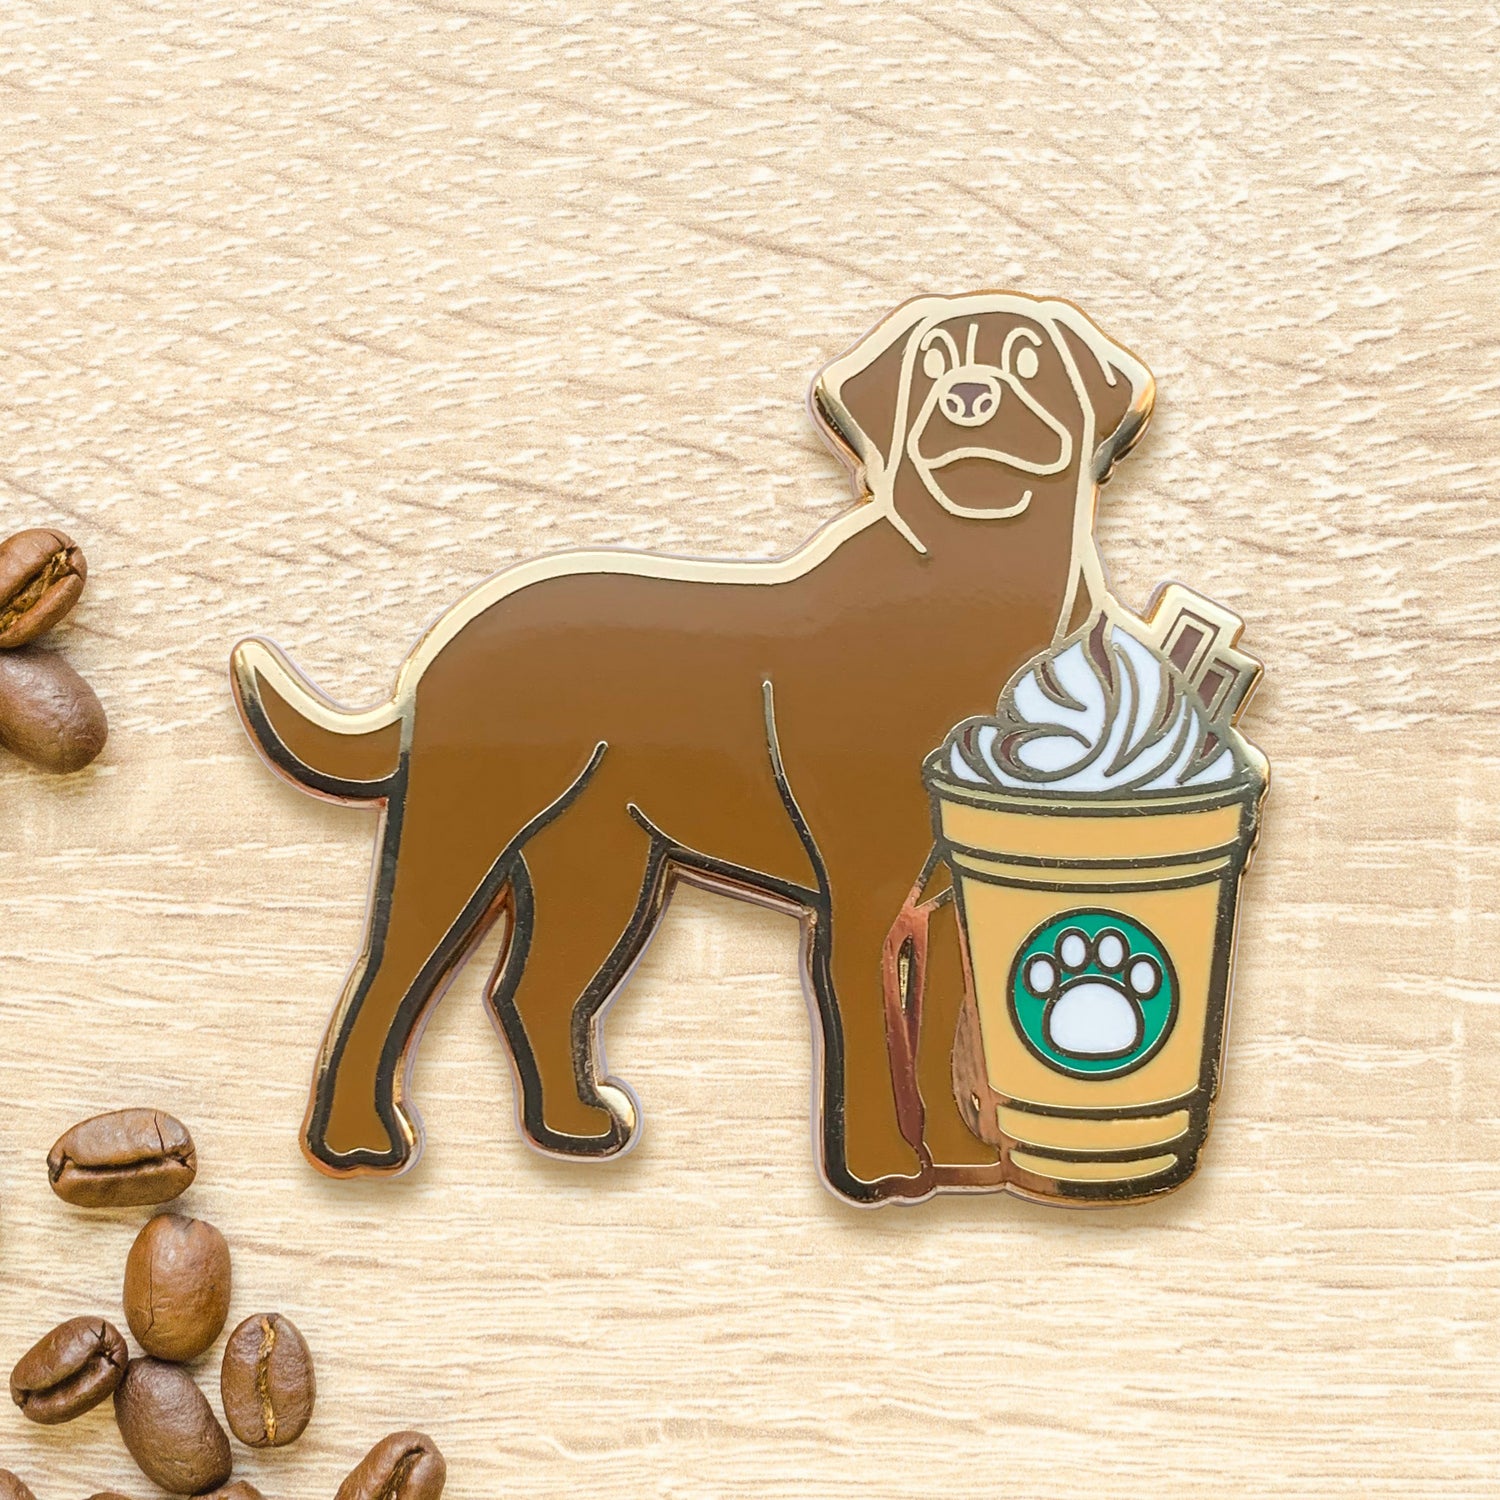 Chocolate Labrador & Chocolate Mocha Frappe Coffee Hard Enamel Pin by Cocktail Critters